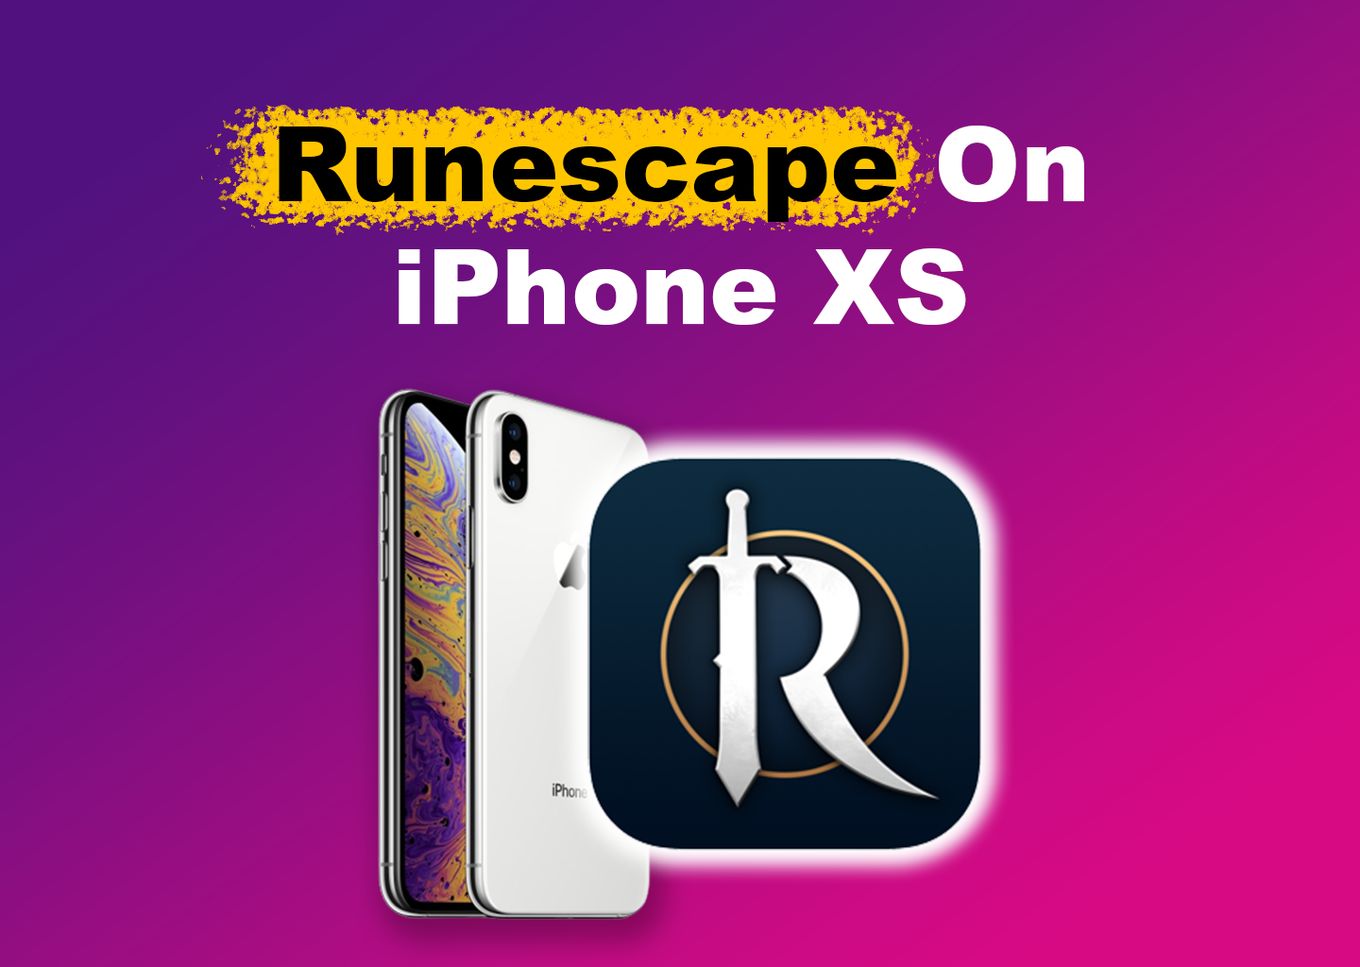 Check Out Some RuneScape Mobile iOS Gameplay